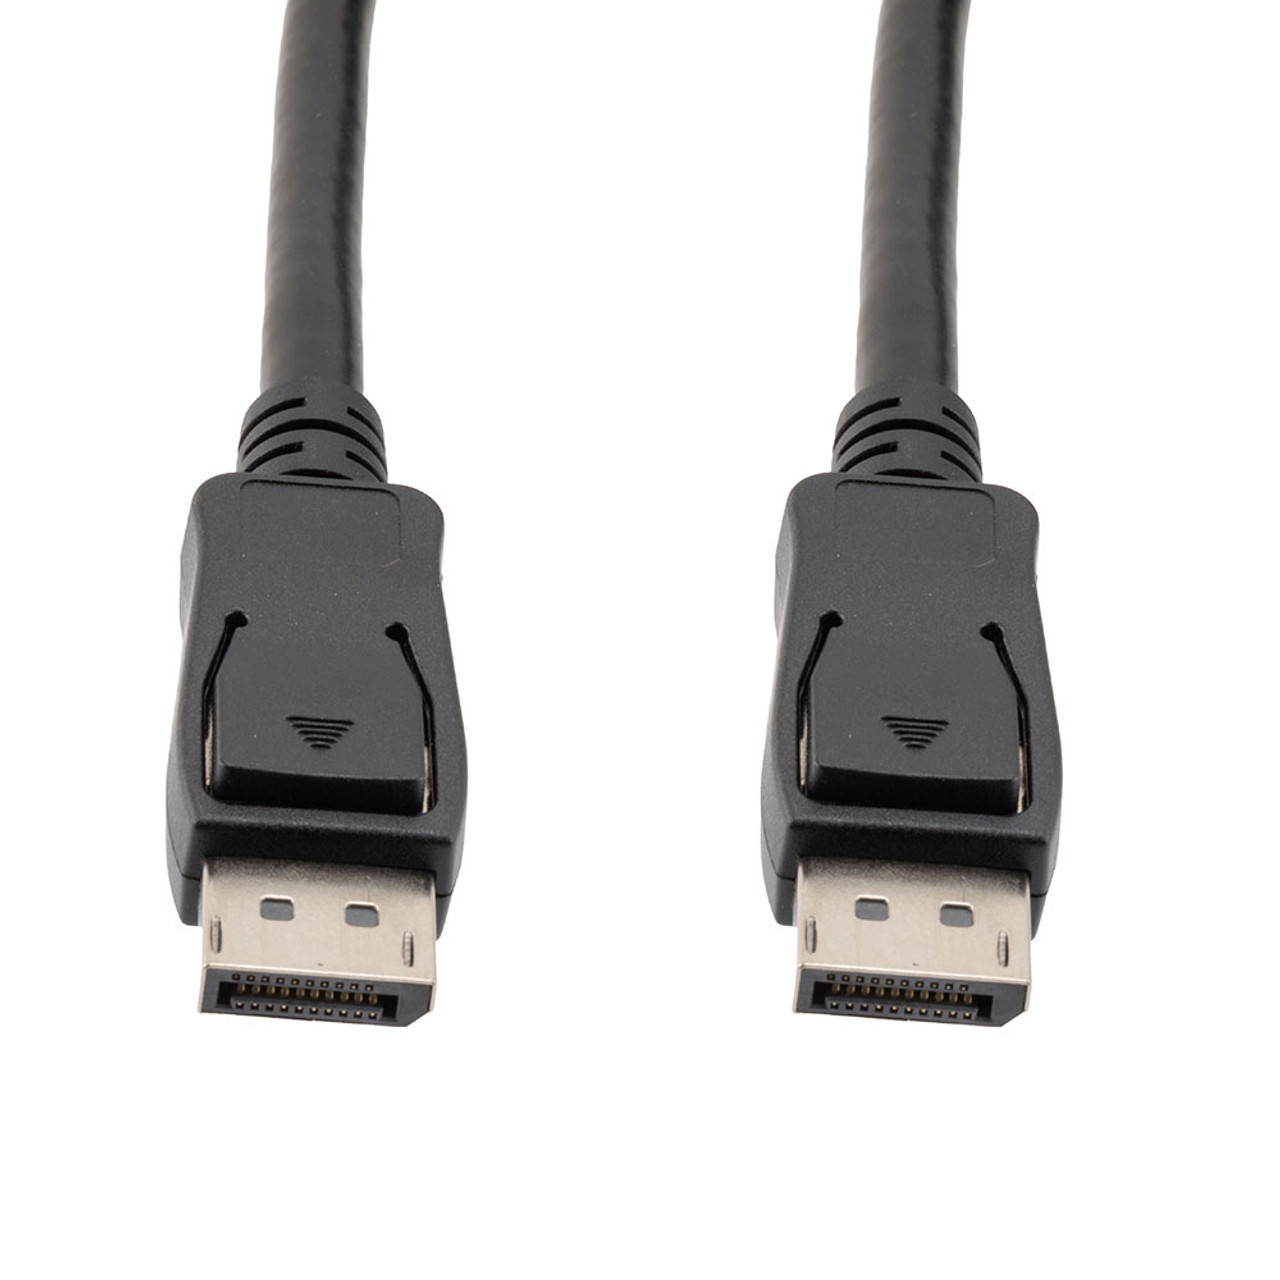 NavePoint DisplayPort 2.0 Male to Male Cable, PVC Jacket, Black, PVC shell, Supports 16K @ 120Hz, 1M 